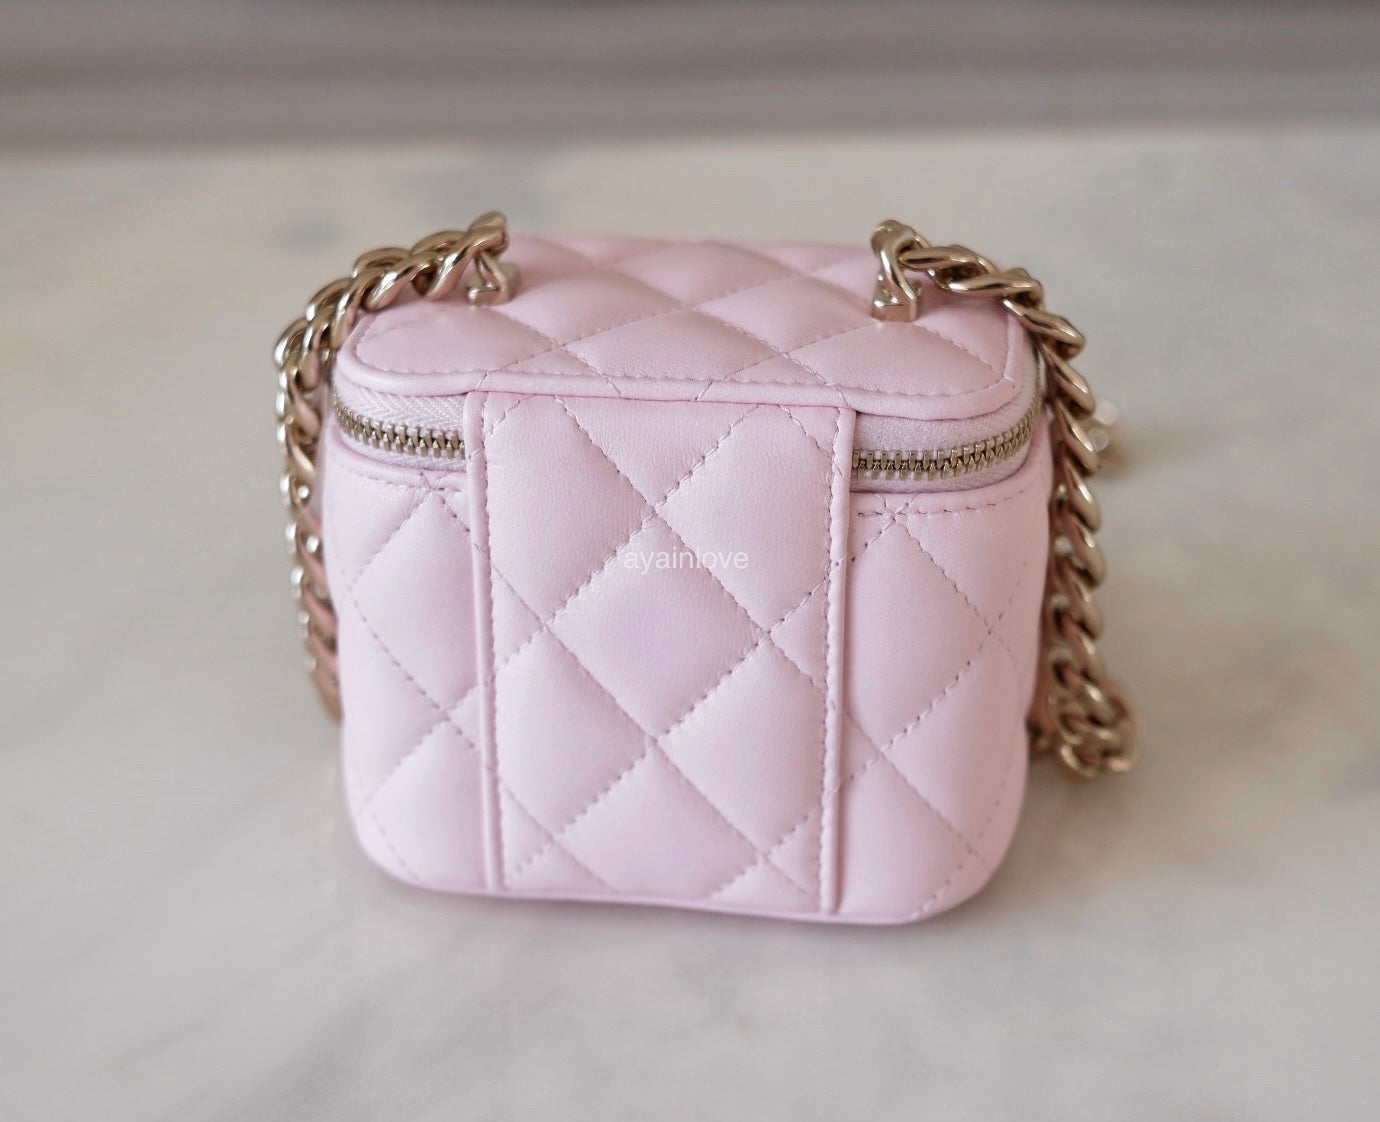 Chanel Small Classic Vanity Case Pink Caviar Light Gold Hardware